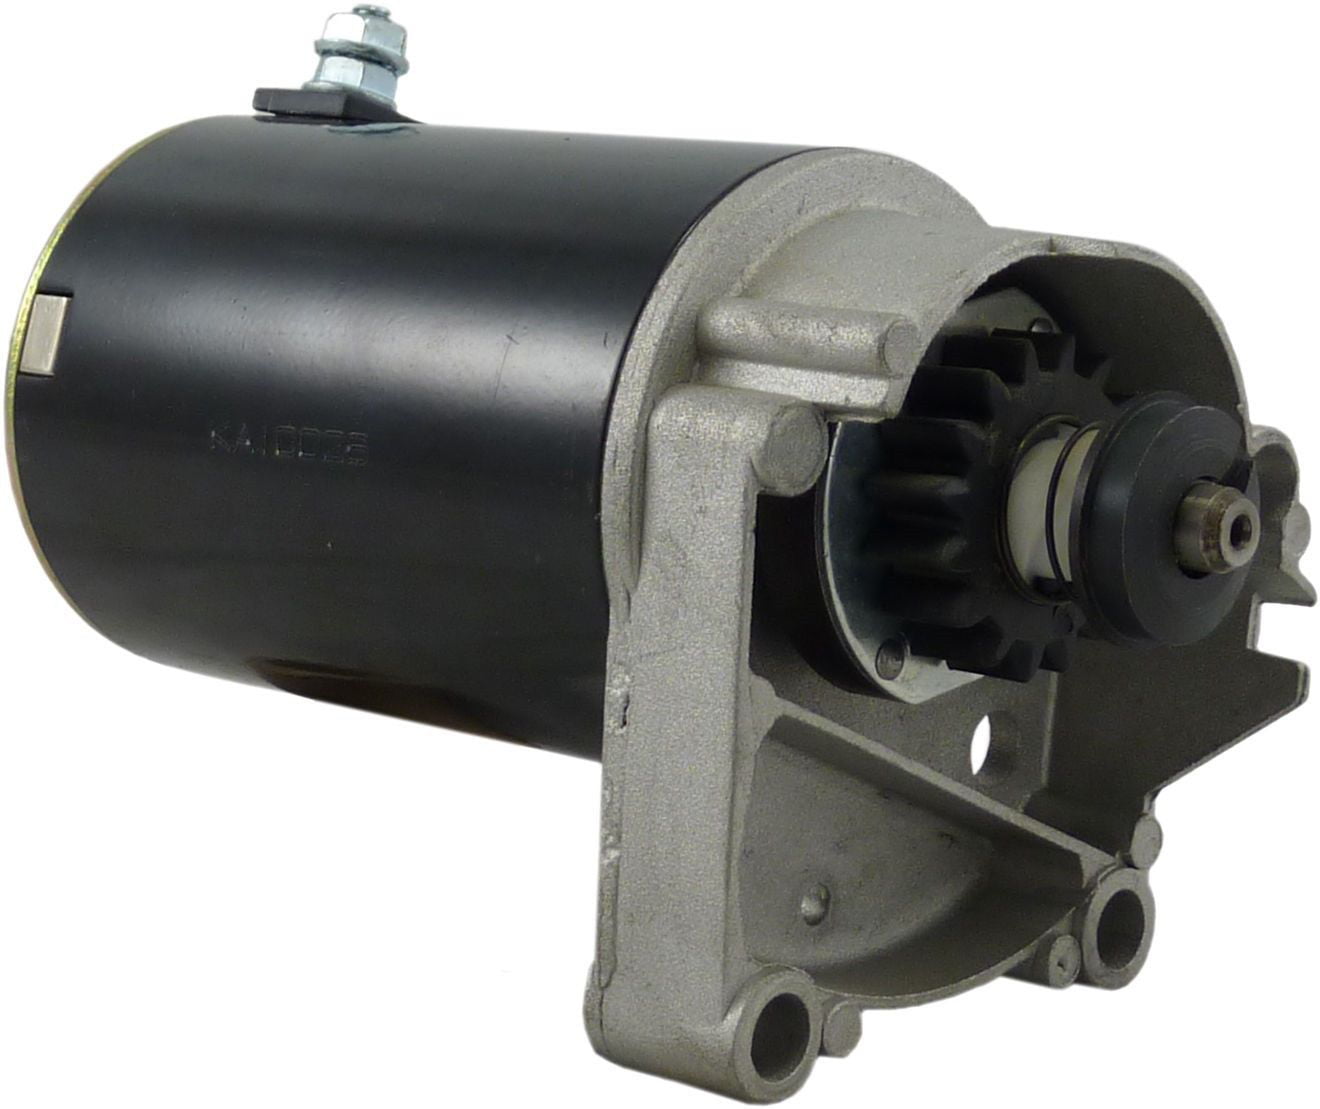 New 12V Starter Motor Briggs & Stratton 14-18HP Lawn Mower Tractor Gas Engines 